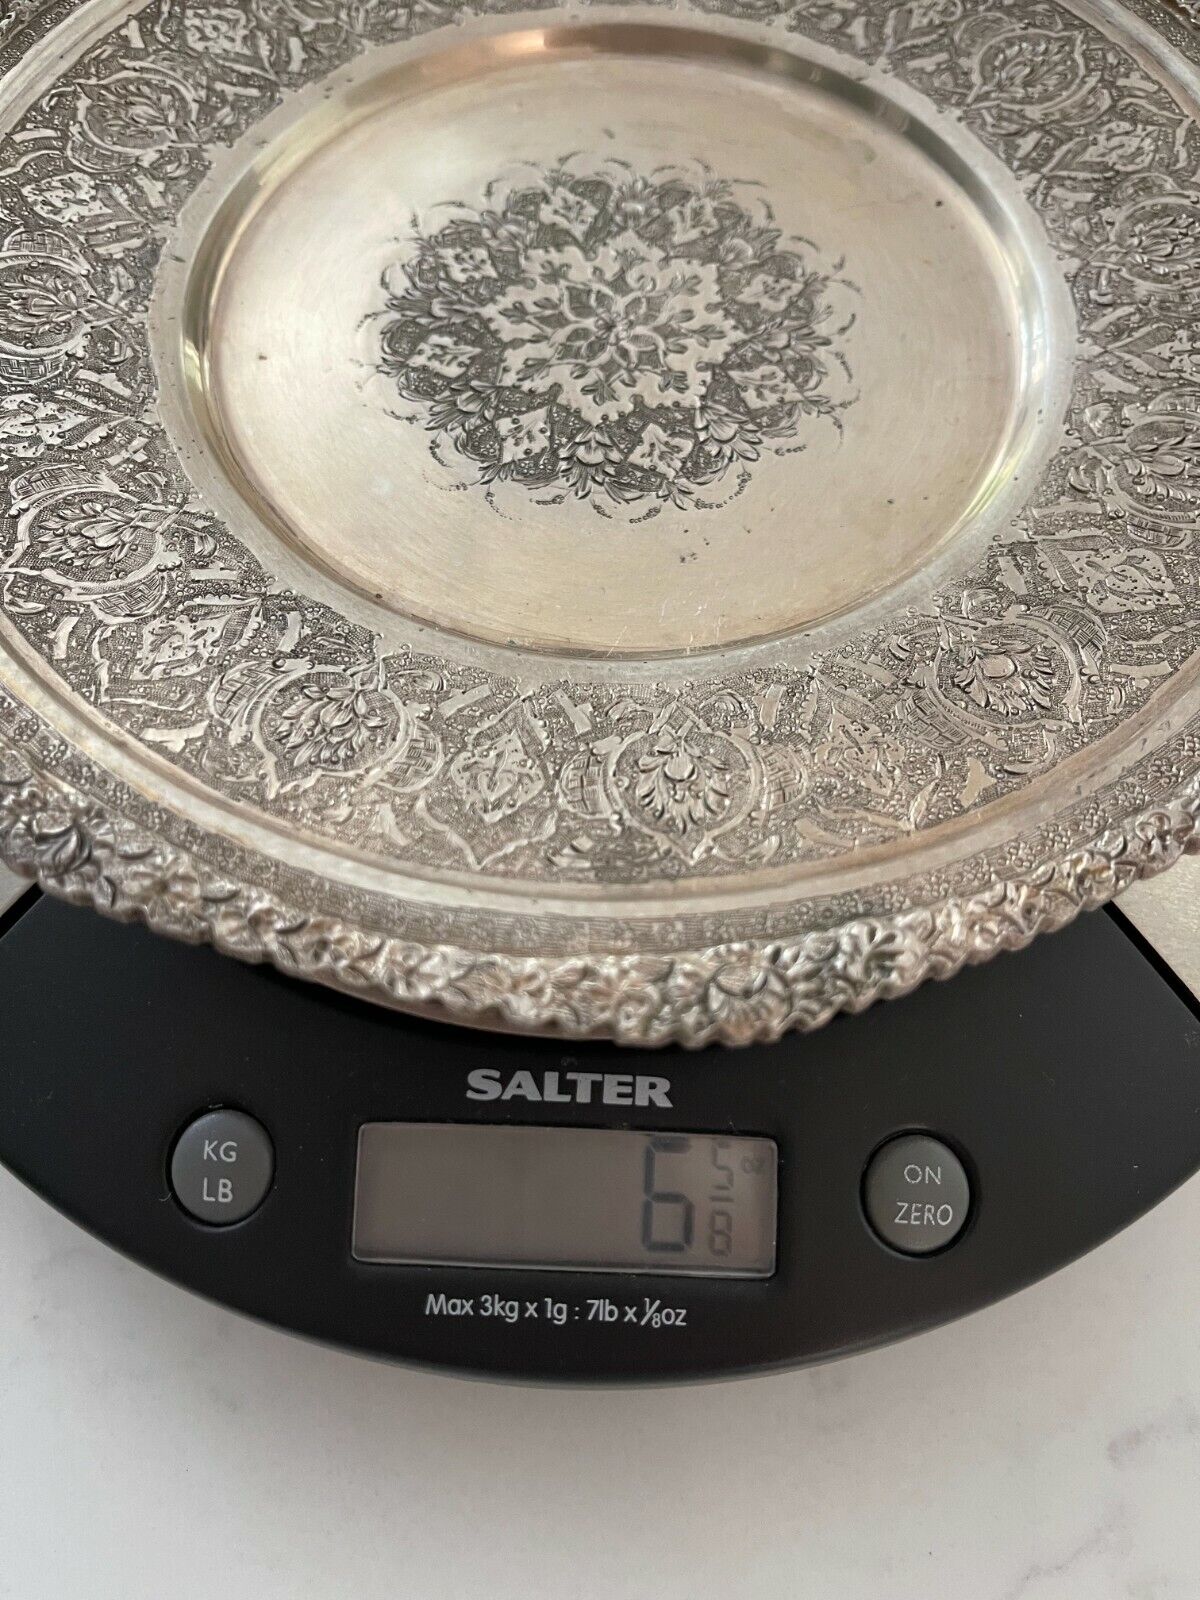 6 Plate Set AUTHENTIC Antique 84 Silver Persian Islamic middle eastern Art  Без бренда - фотография #9